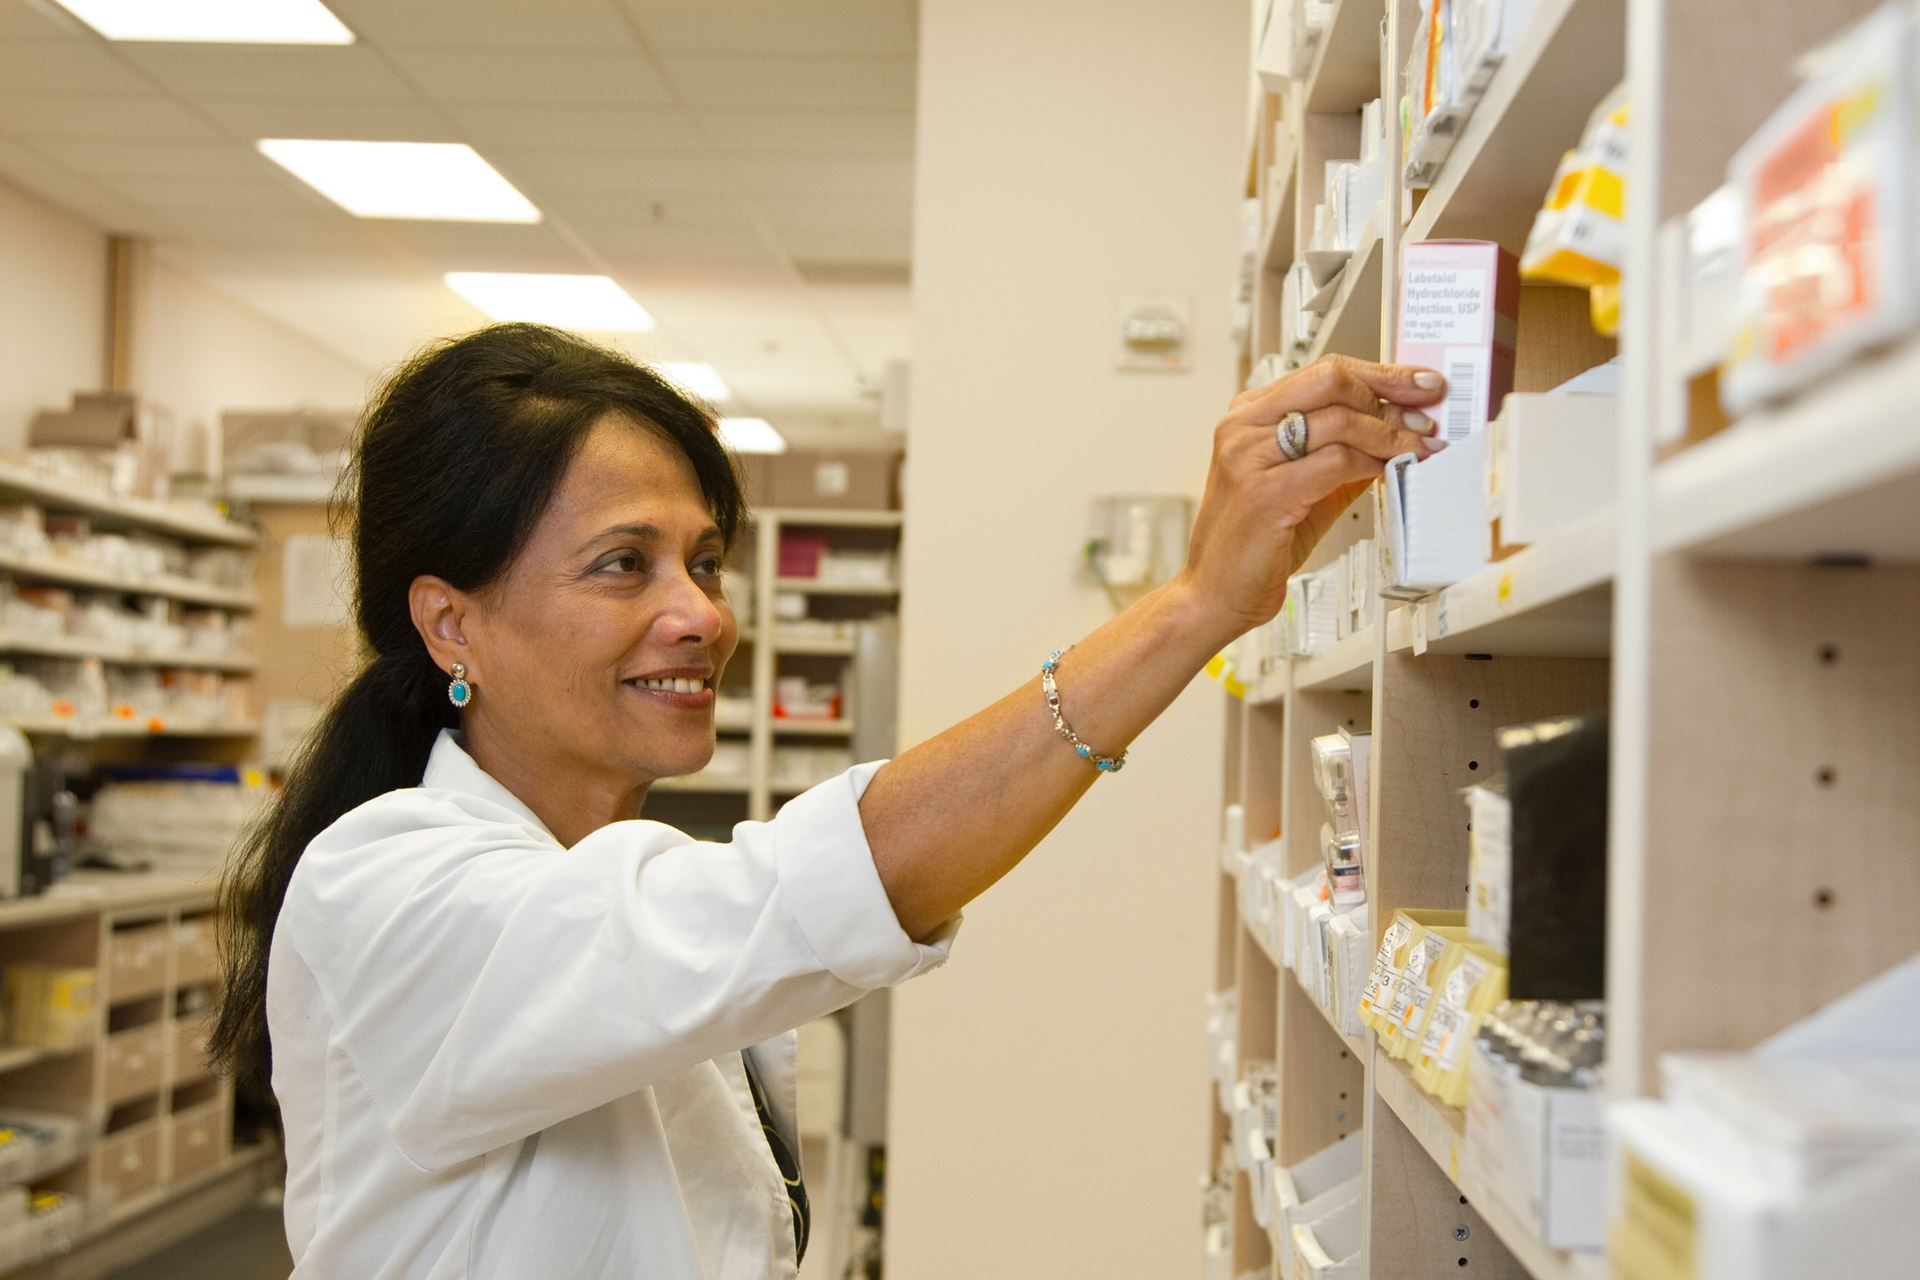 A pharmacist reaches up to get a medication off a shelf in a pharmacy